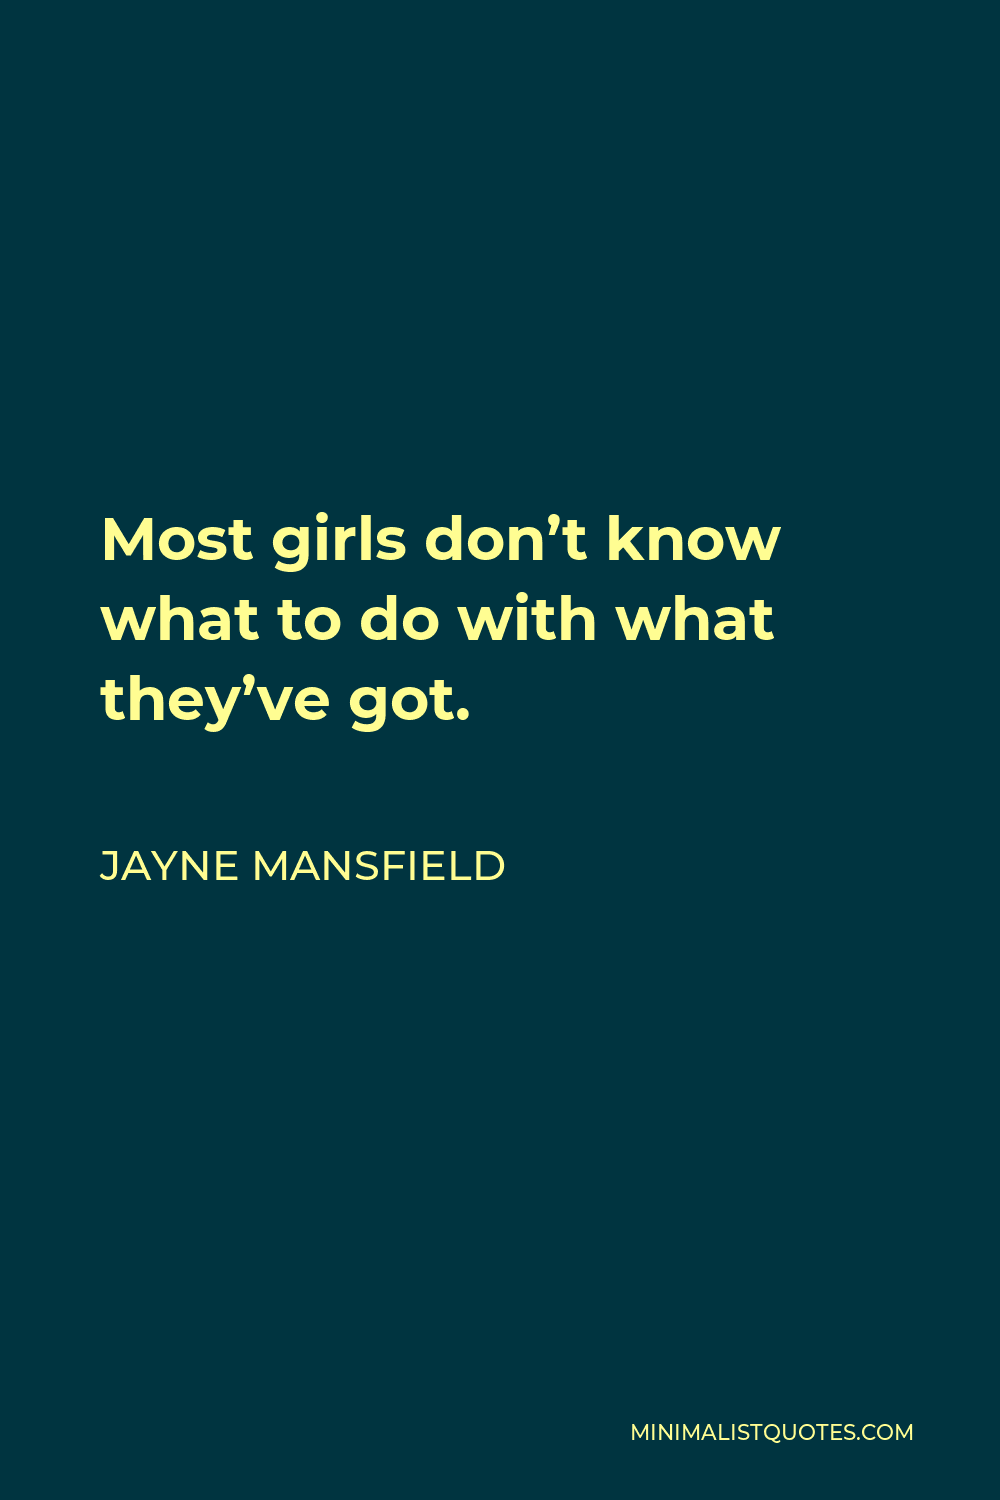 Jayne Mansfield Quote - Most girls don’t know what to do with what they’ve got.